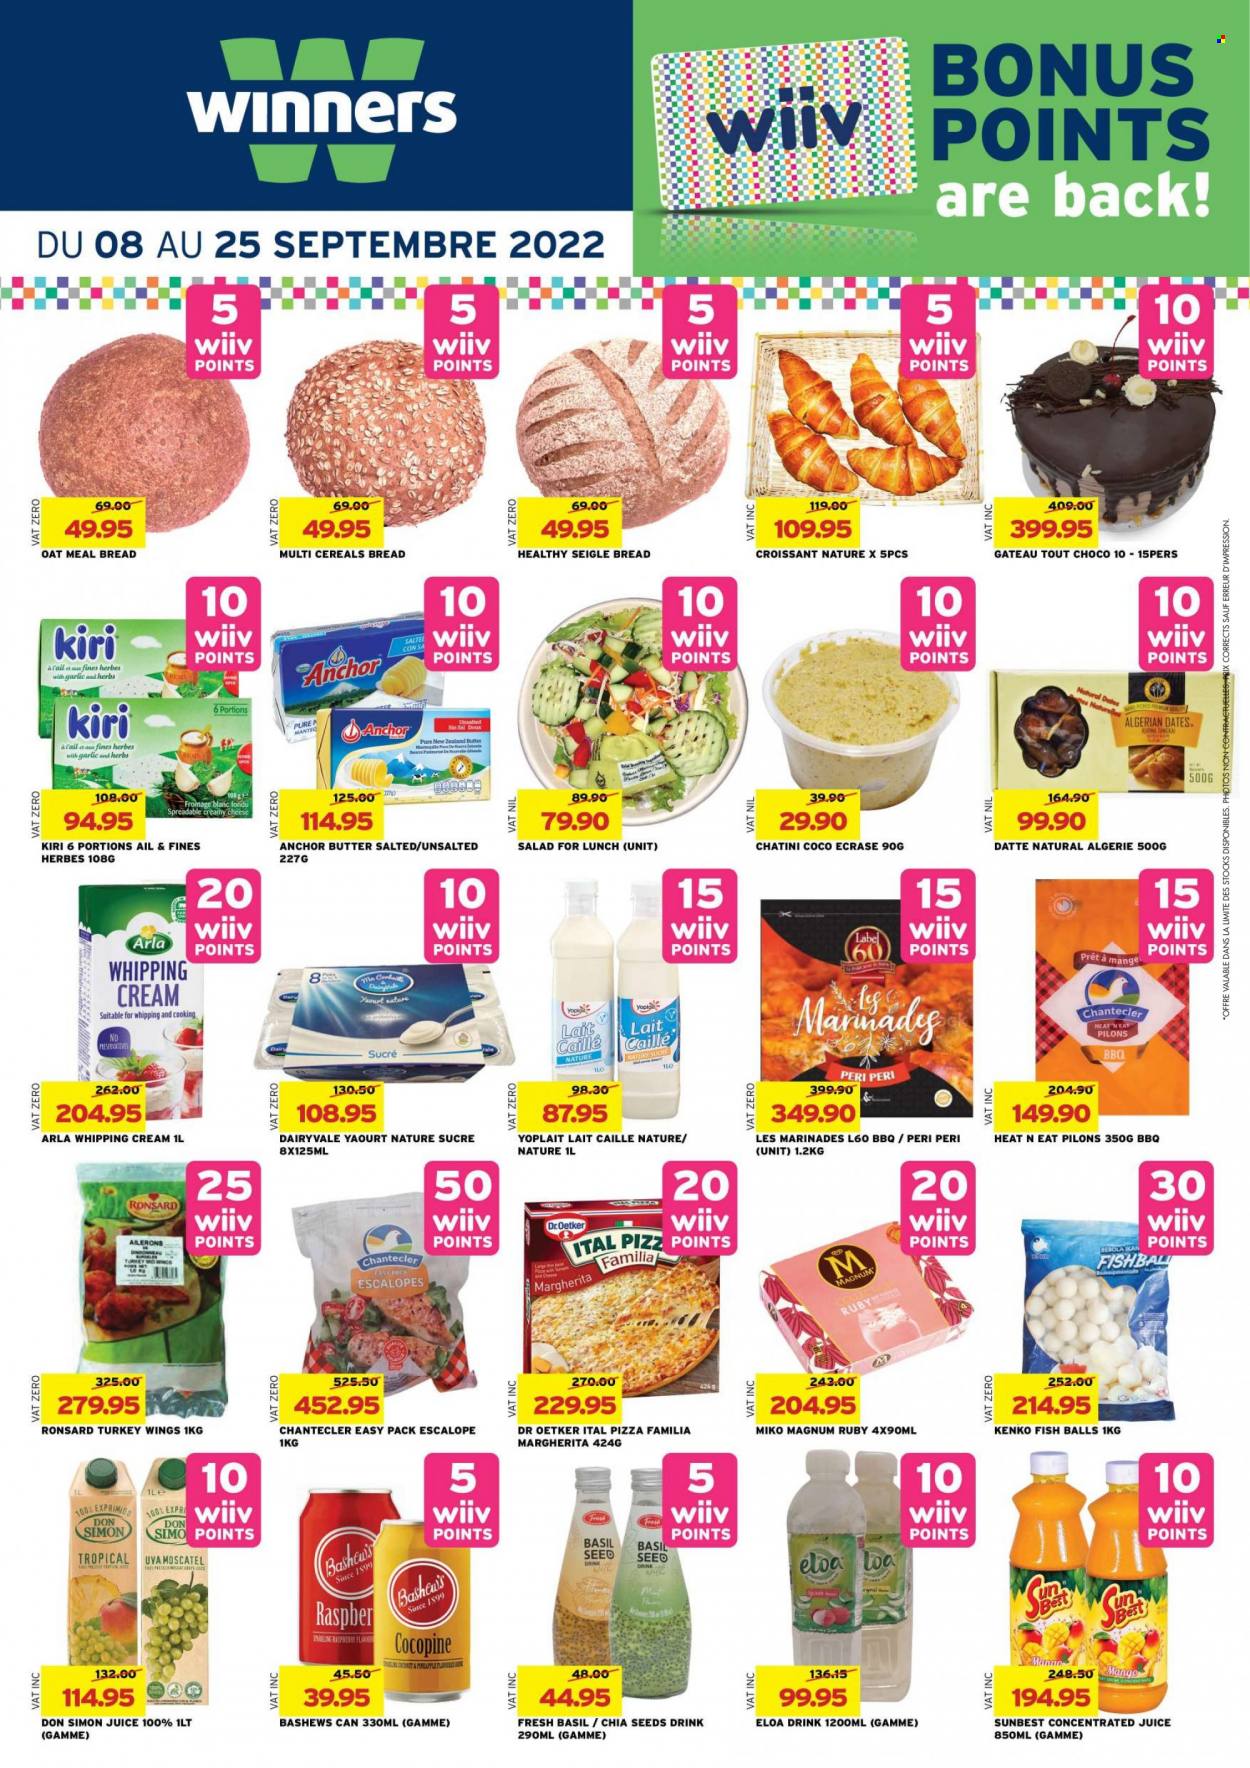 thumbnail - Winner's Catalogue - 8.09.2022 - 25.09.2022 - Sales products - bread, croissant, salad, mango, pineapple, fish, pizza, Kiri, Dr. Oetker, Arla, Yoplait, butter, Anchor, whipping cream, Magnum, Ital Pizza, oats, cereals, chia seeds, juice, Moscato, turkey wings, turkey. Page 21.